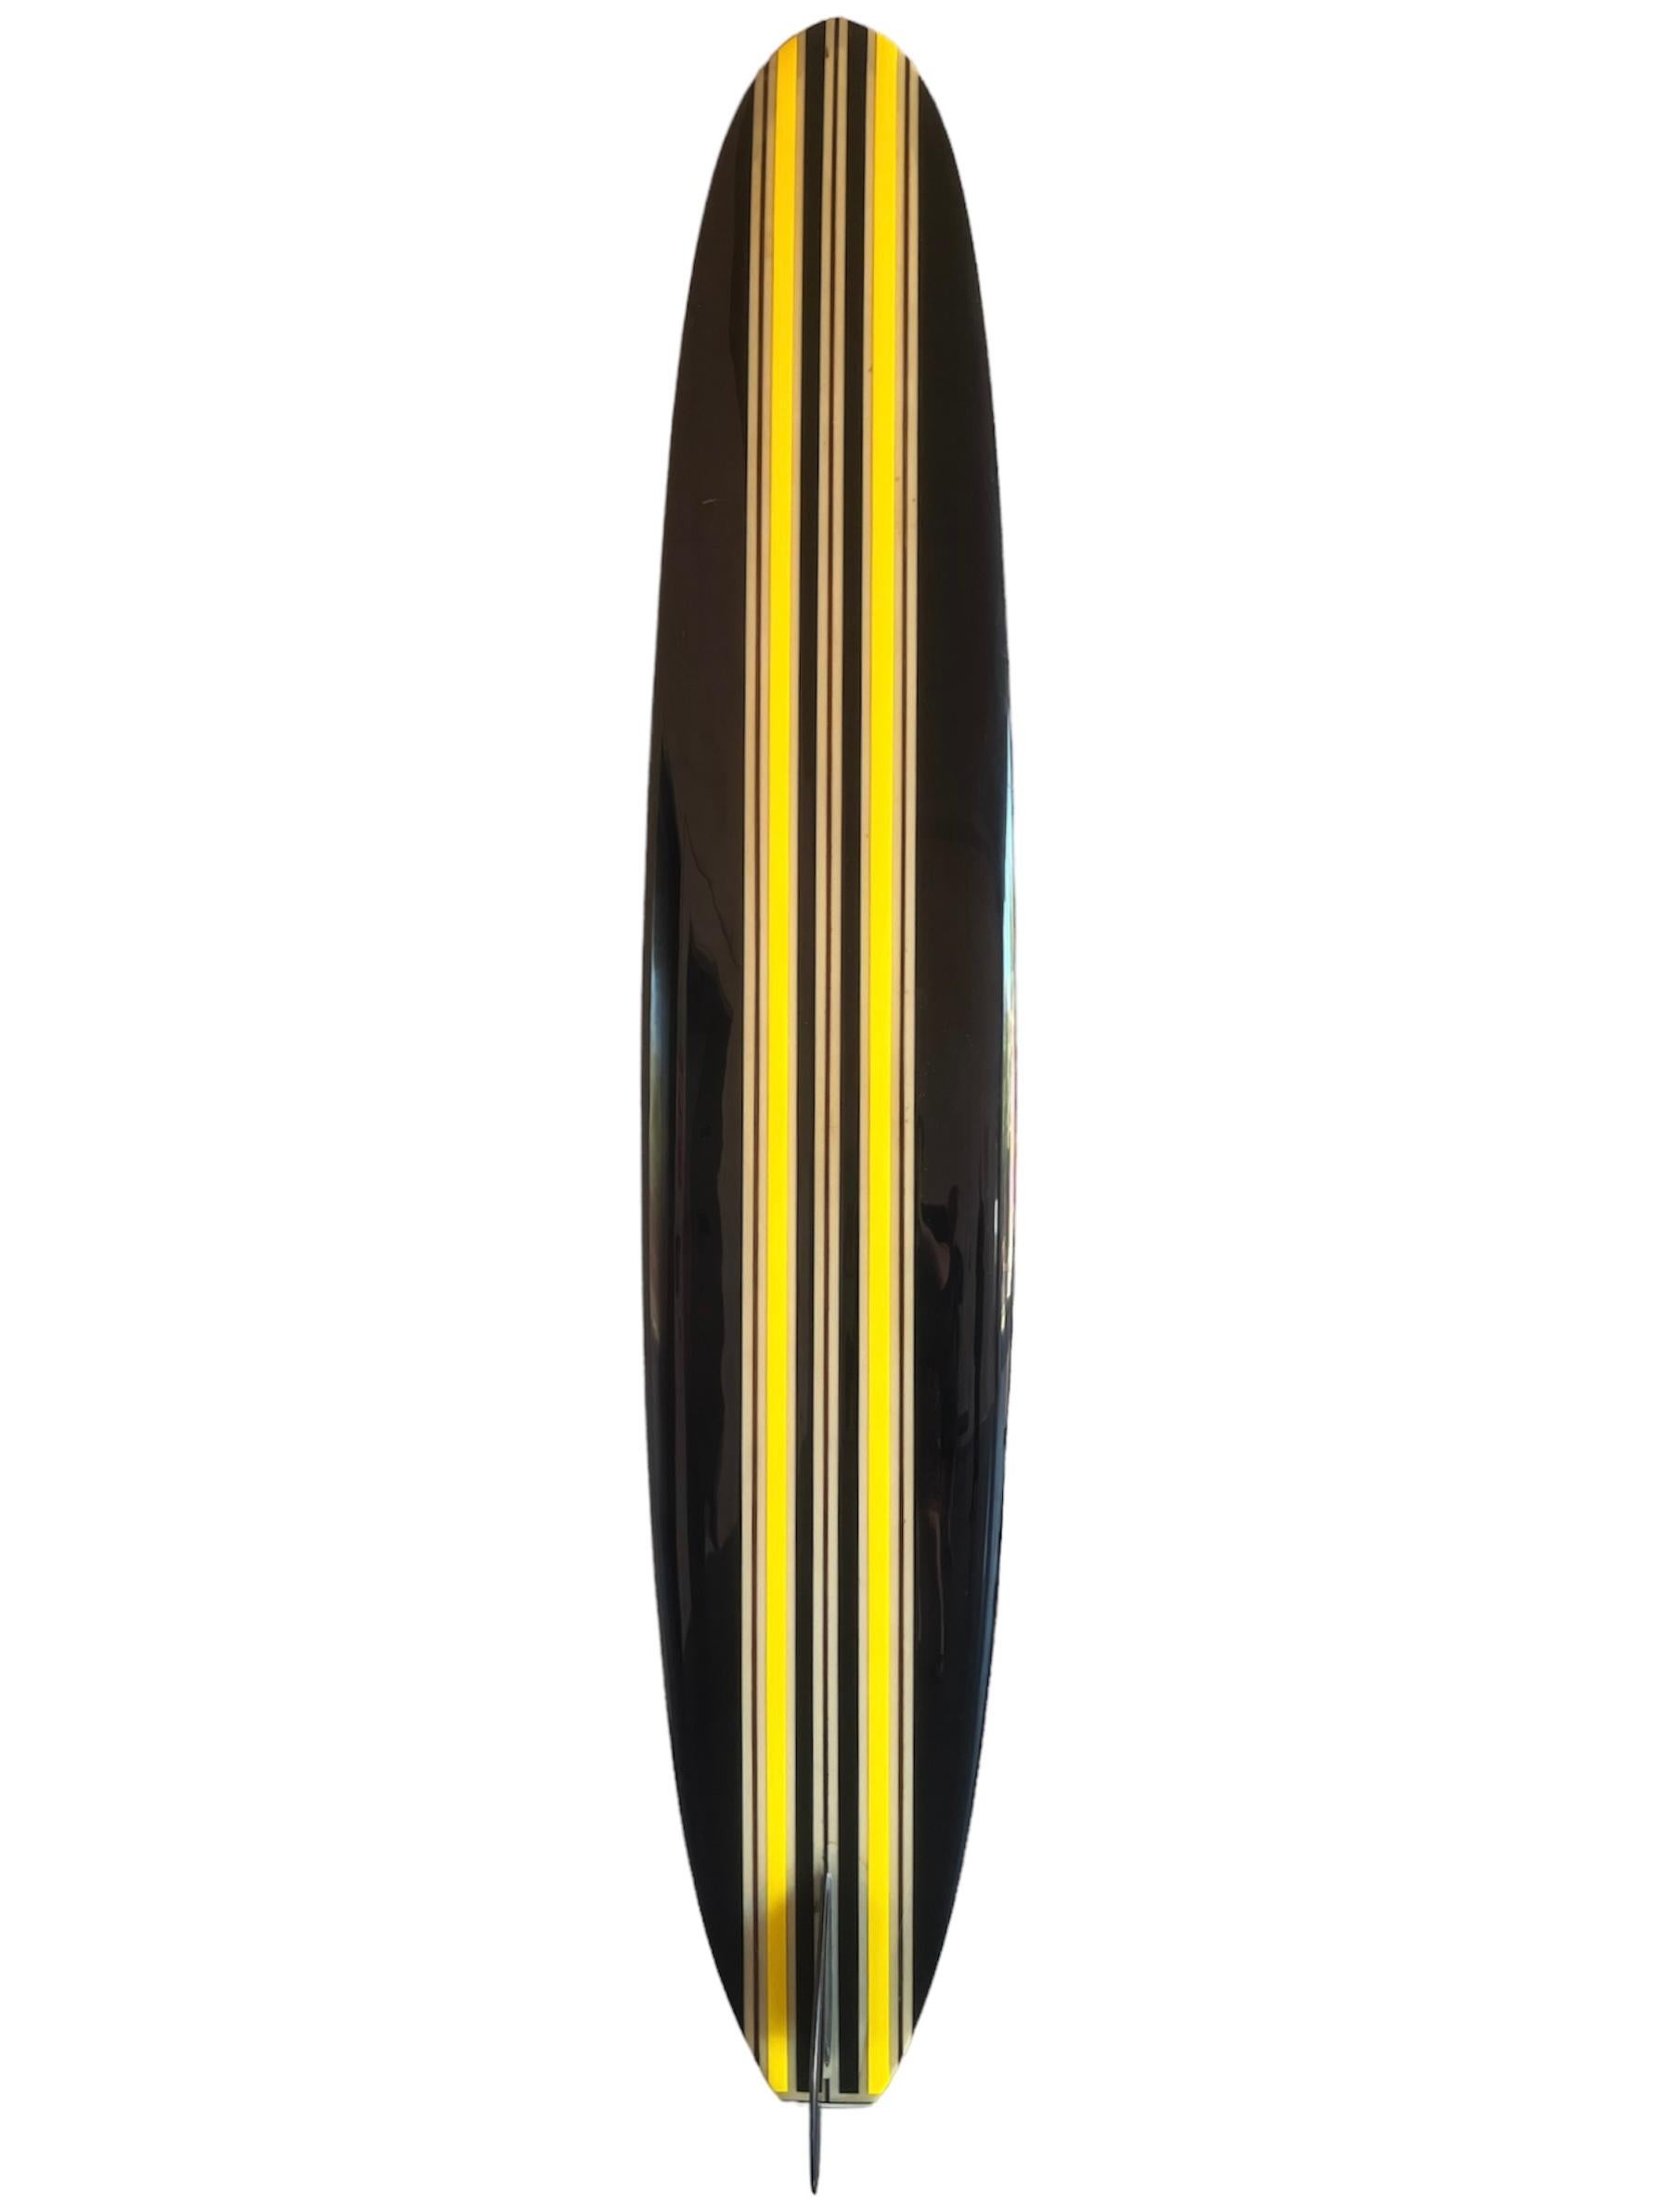 Vintage 1960s Hansen classic longboard. Features sleek black rails with alternating yellow & black stripes. 3 redwood stringers with square tail. A remarkable example of a mid-1960s classic longboard shaped under the revered Hansen Surfboards label. 